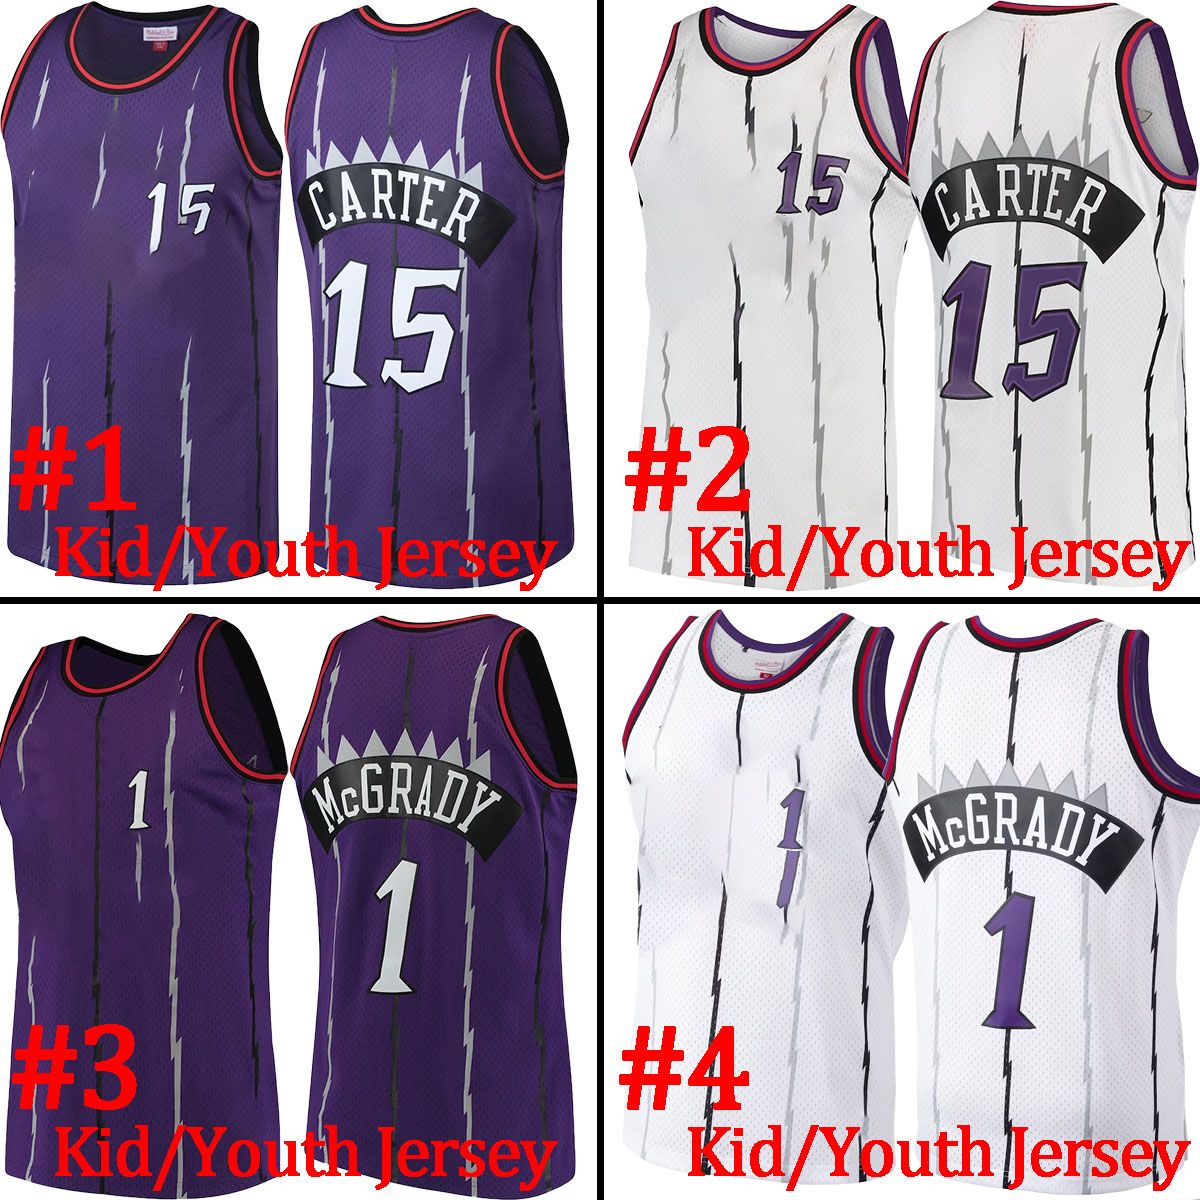 Youth/kid Jersey15